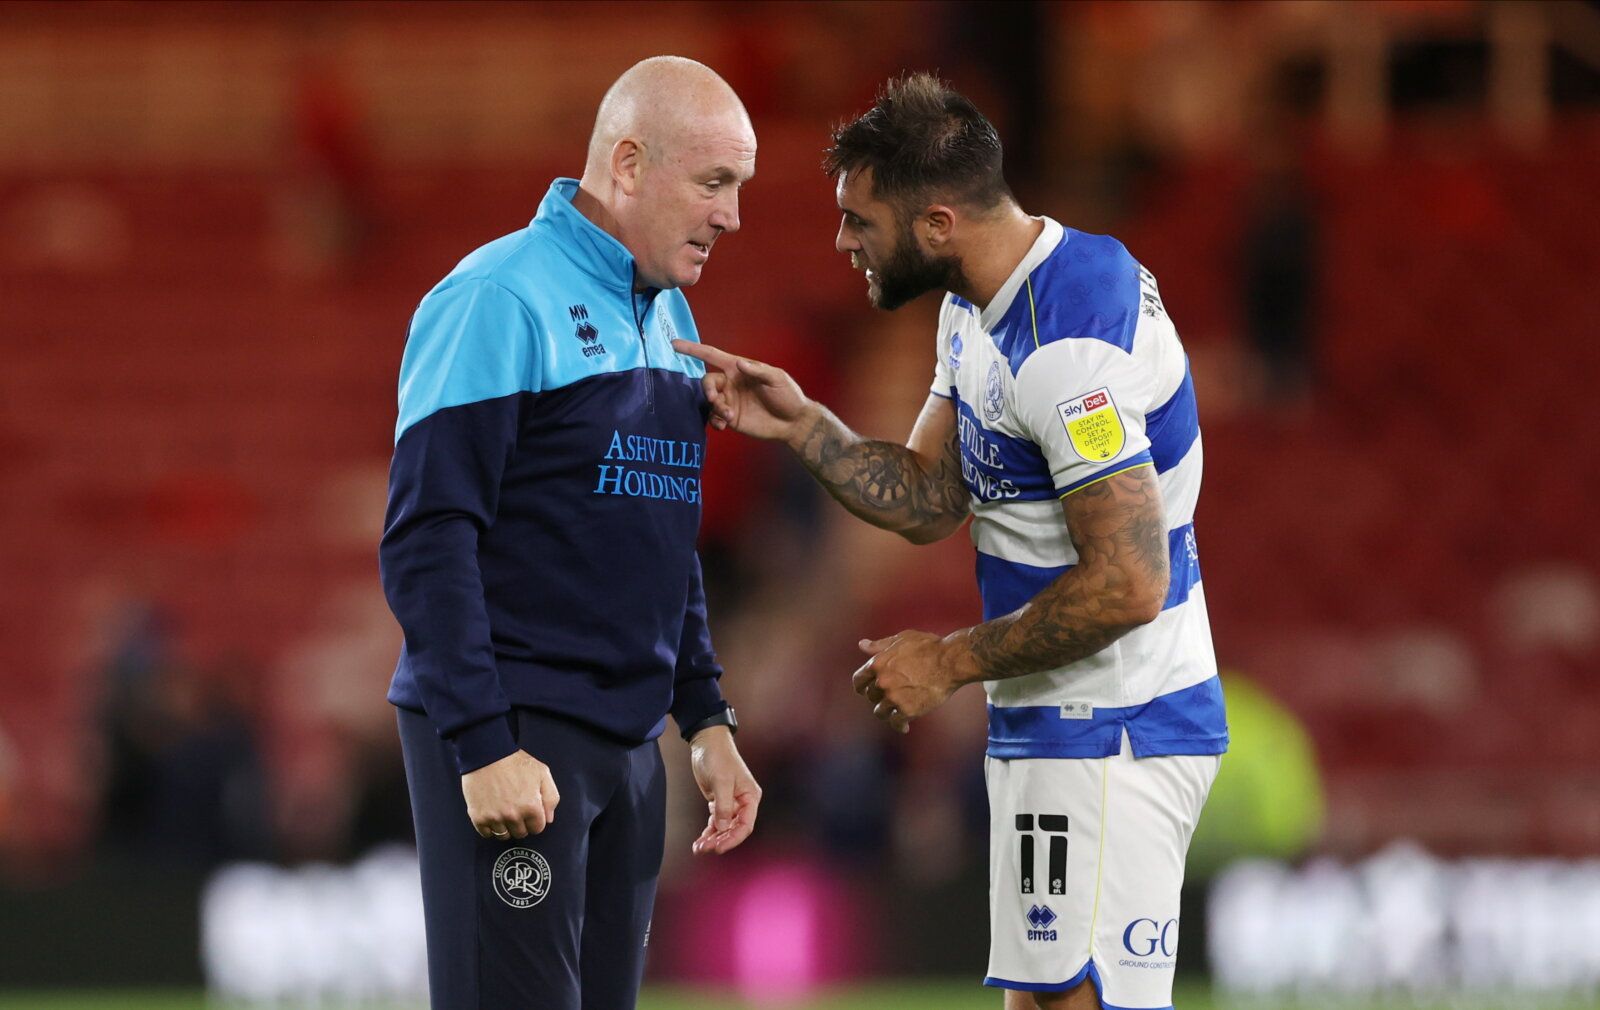 Soccer Football - Championship - Middlesbrough v Queens Park Rangers - Riverside Stadium, Middlesbrough, Britain - August 18, 2021   QPR manager Mark Warburton with Charlie Austin after the match     Action Images/Lee Smith    EDITORIAL USE ONLY. No use with unauthorized audio, video, data, fixture lists, club/league logos or 